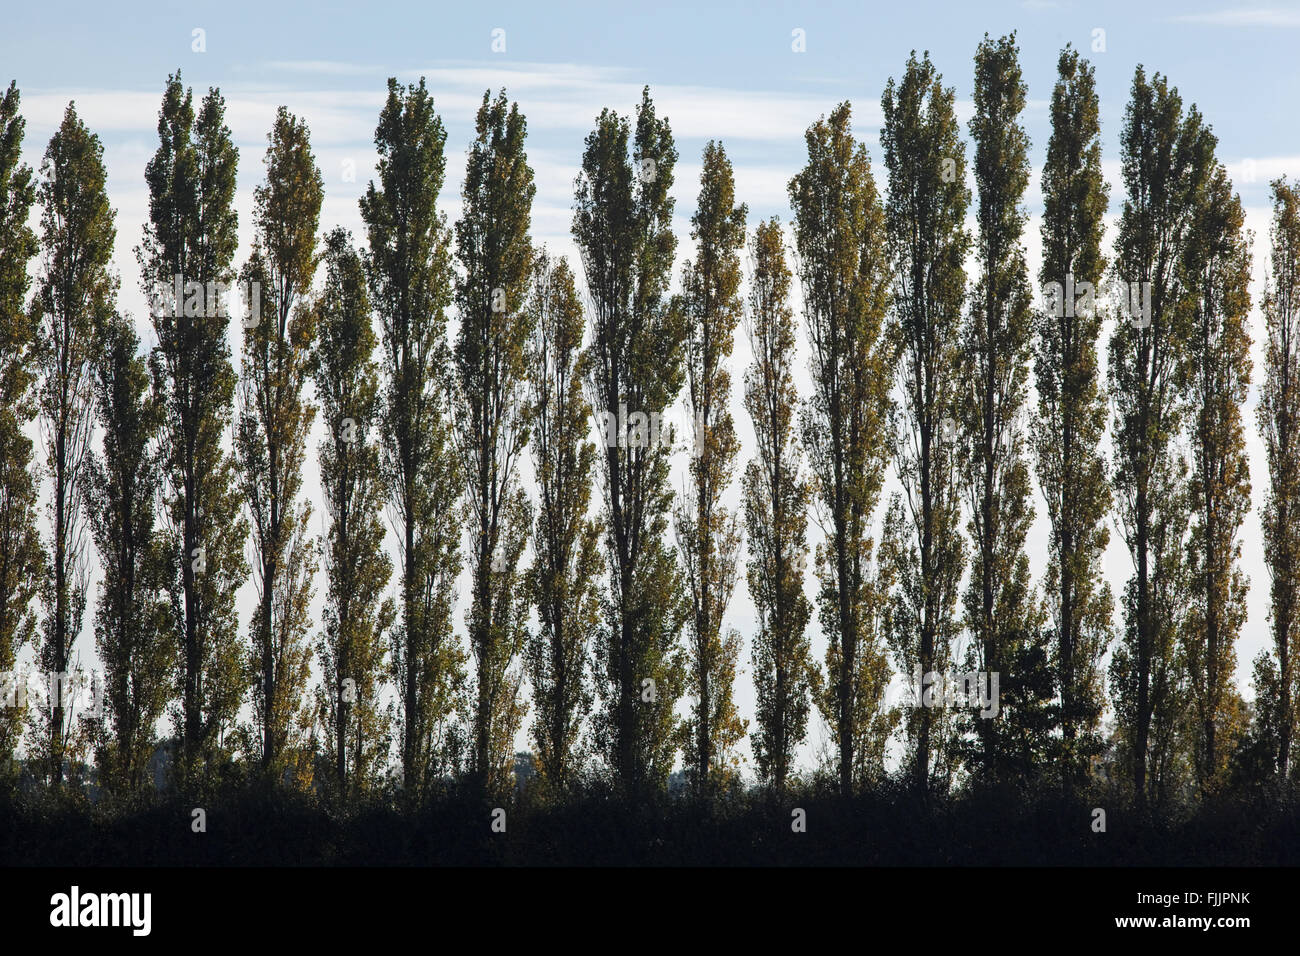 Lombardy Poplar Trees (Populus nigra "Italica"). Sometimes planted to screen perceived 'eye-sores' within landscape. Stock Photo